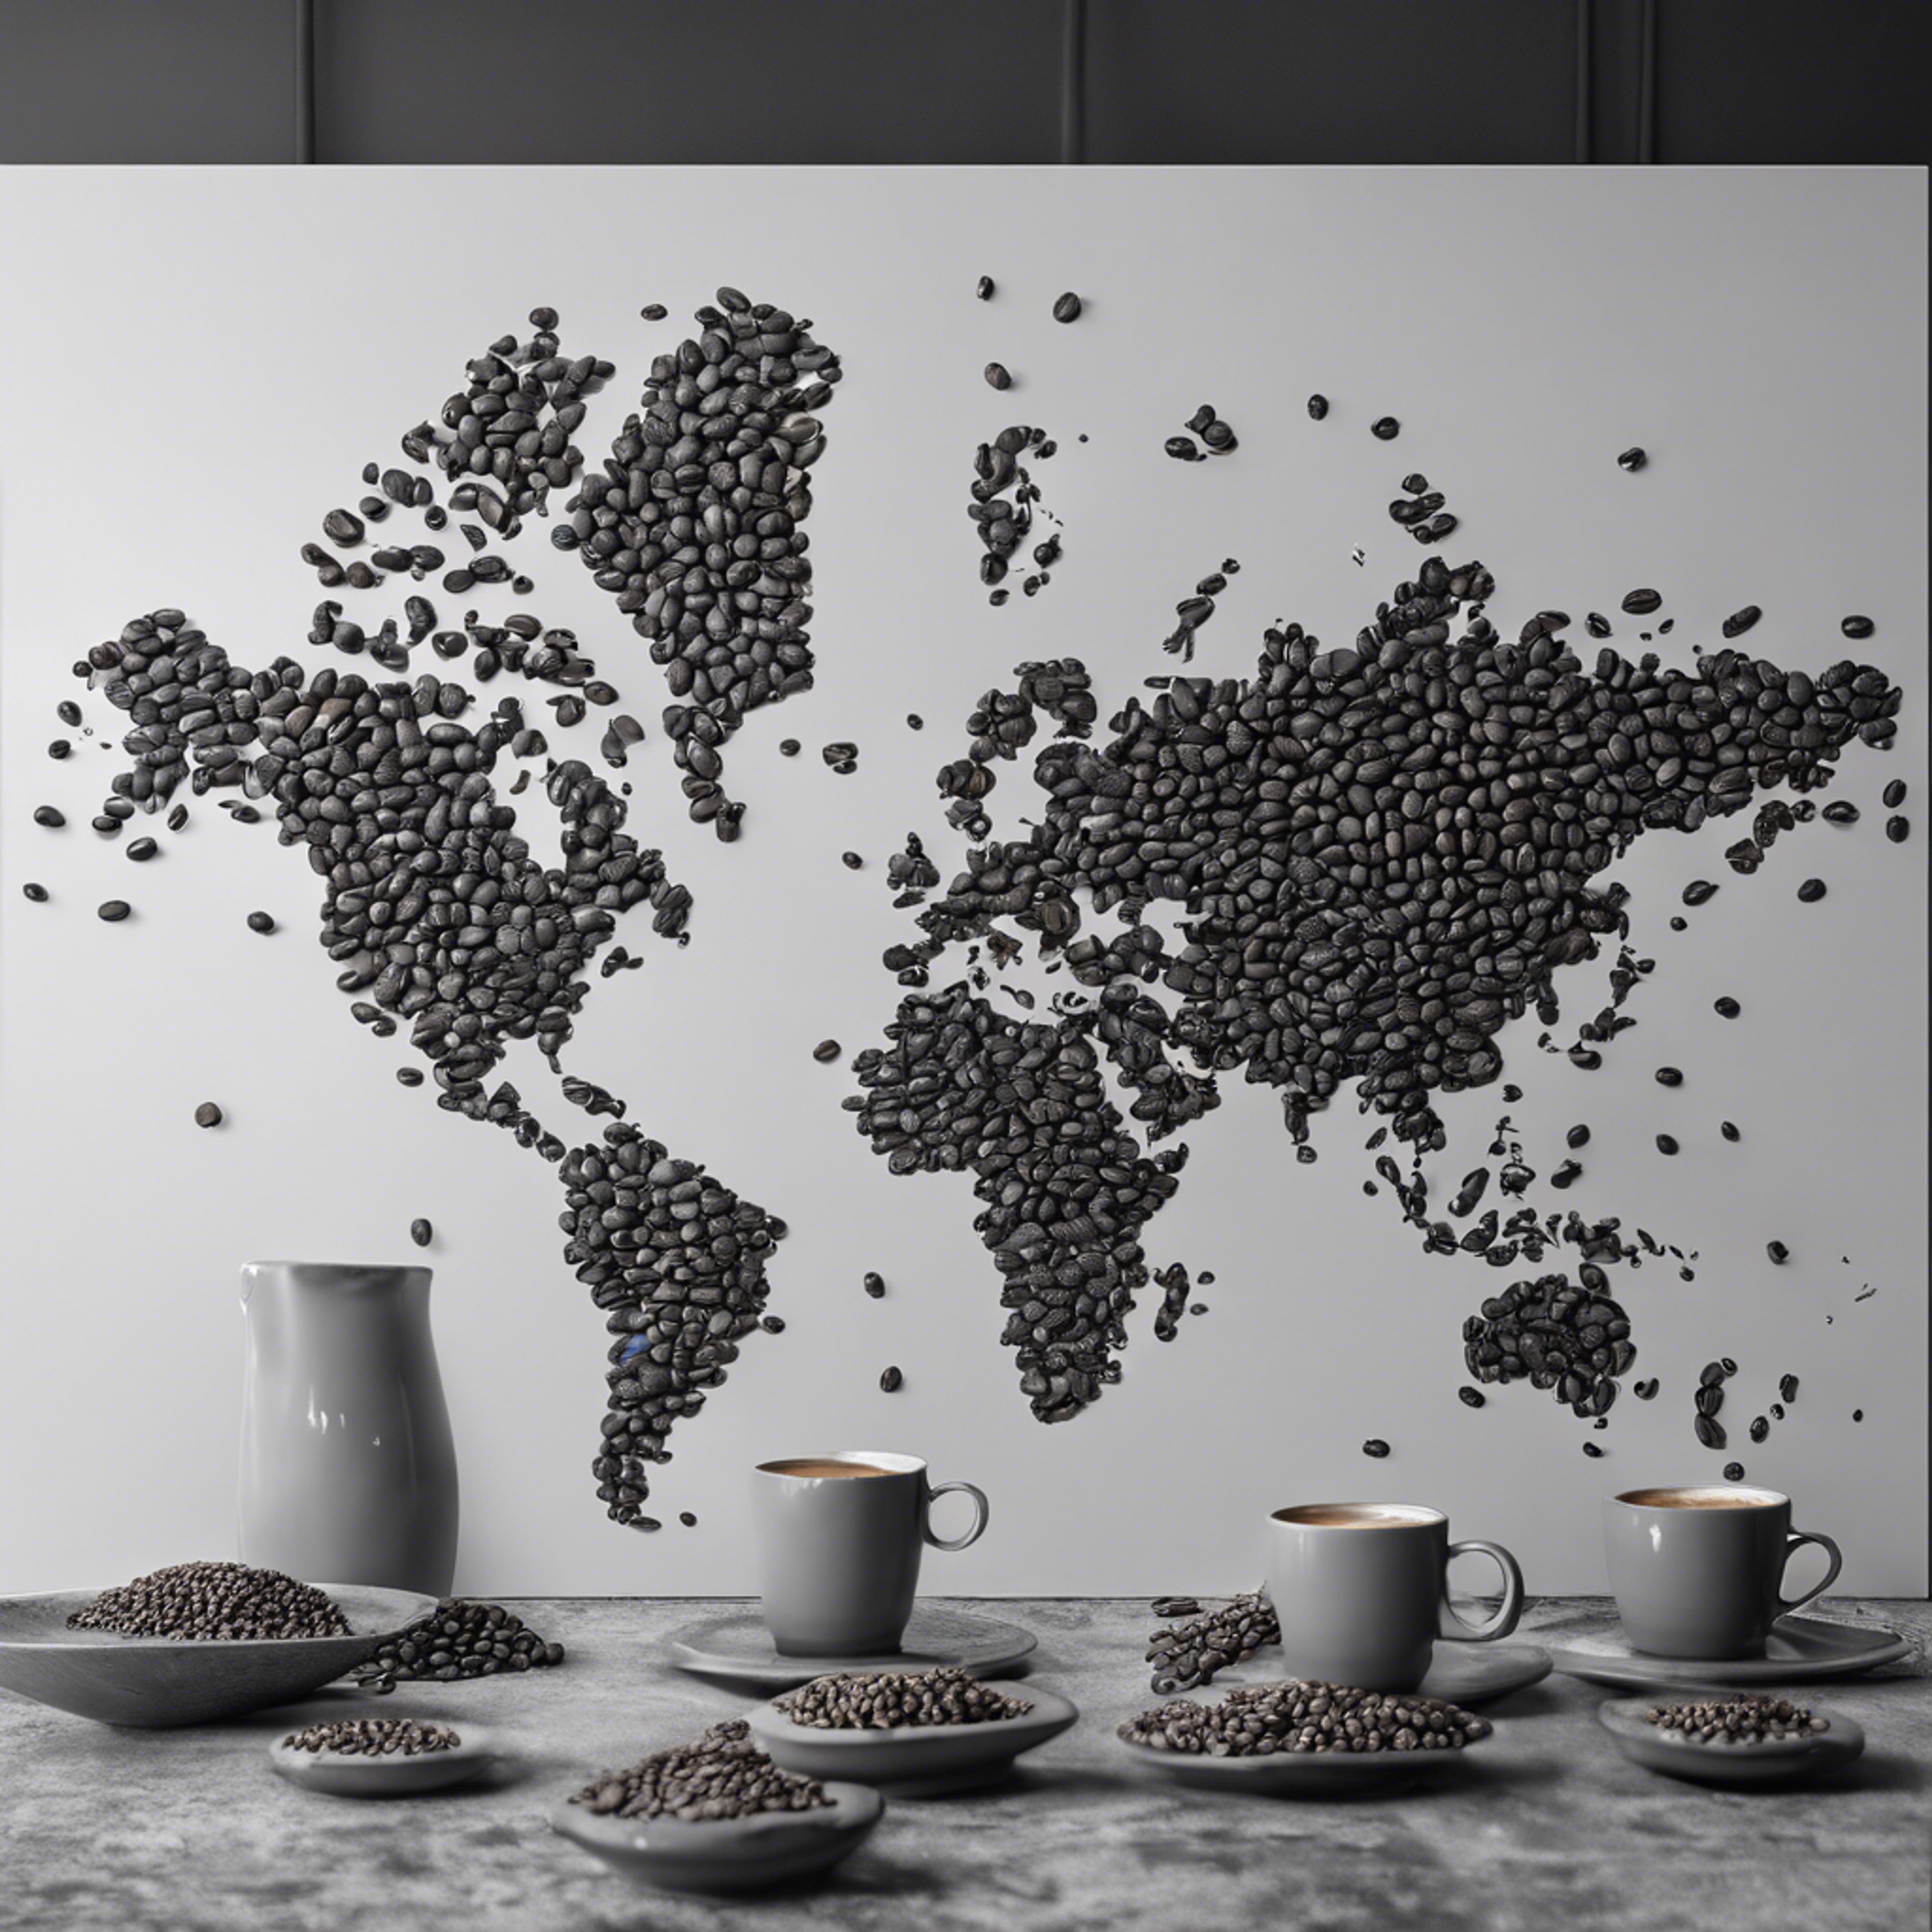 A grayscale world map laid out with coffee beans on a cafe table. Tapeta[a42175c9d73a43528667]